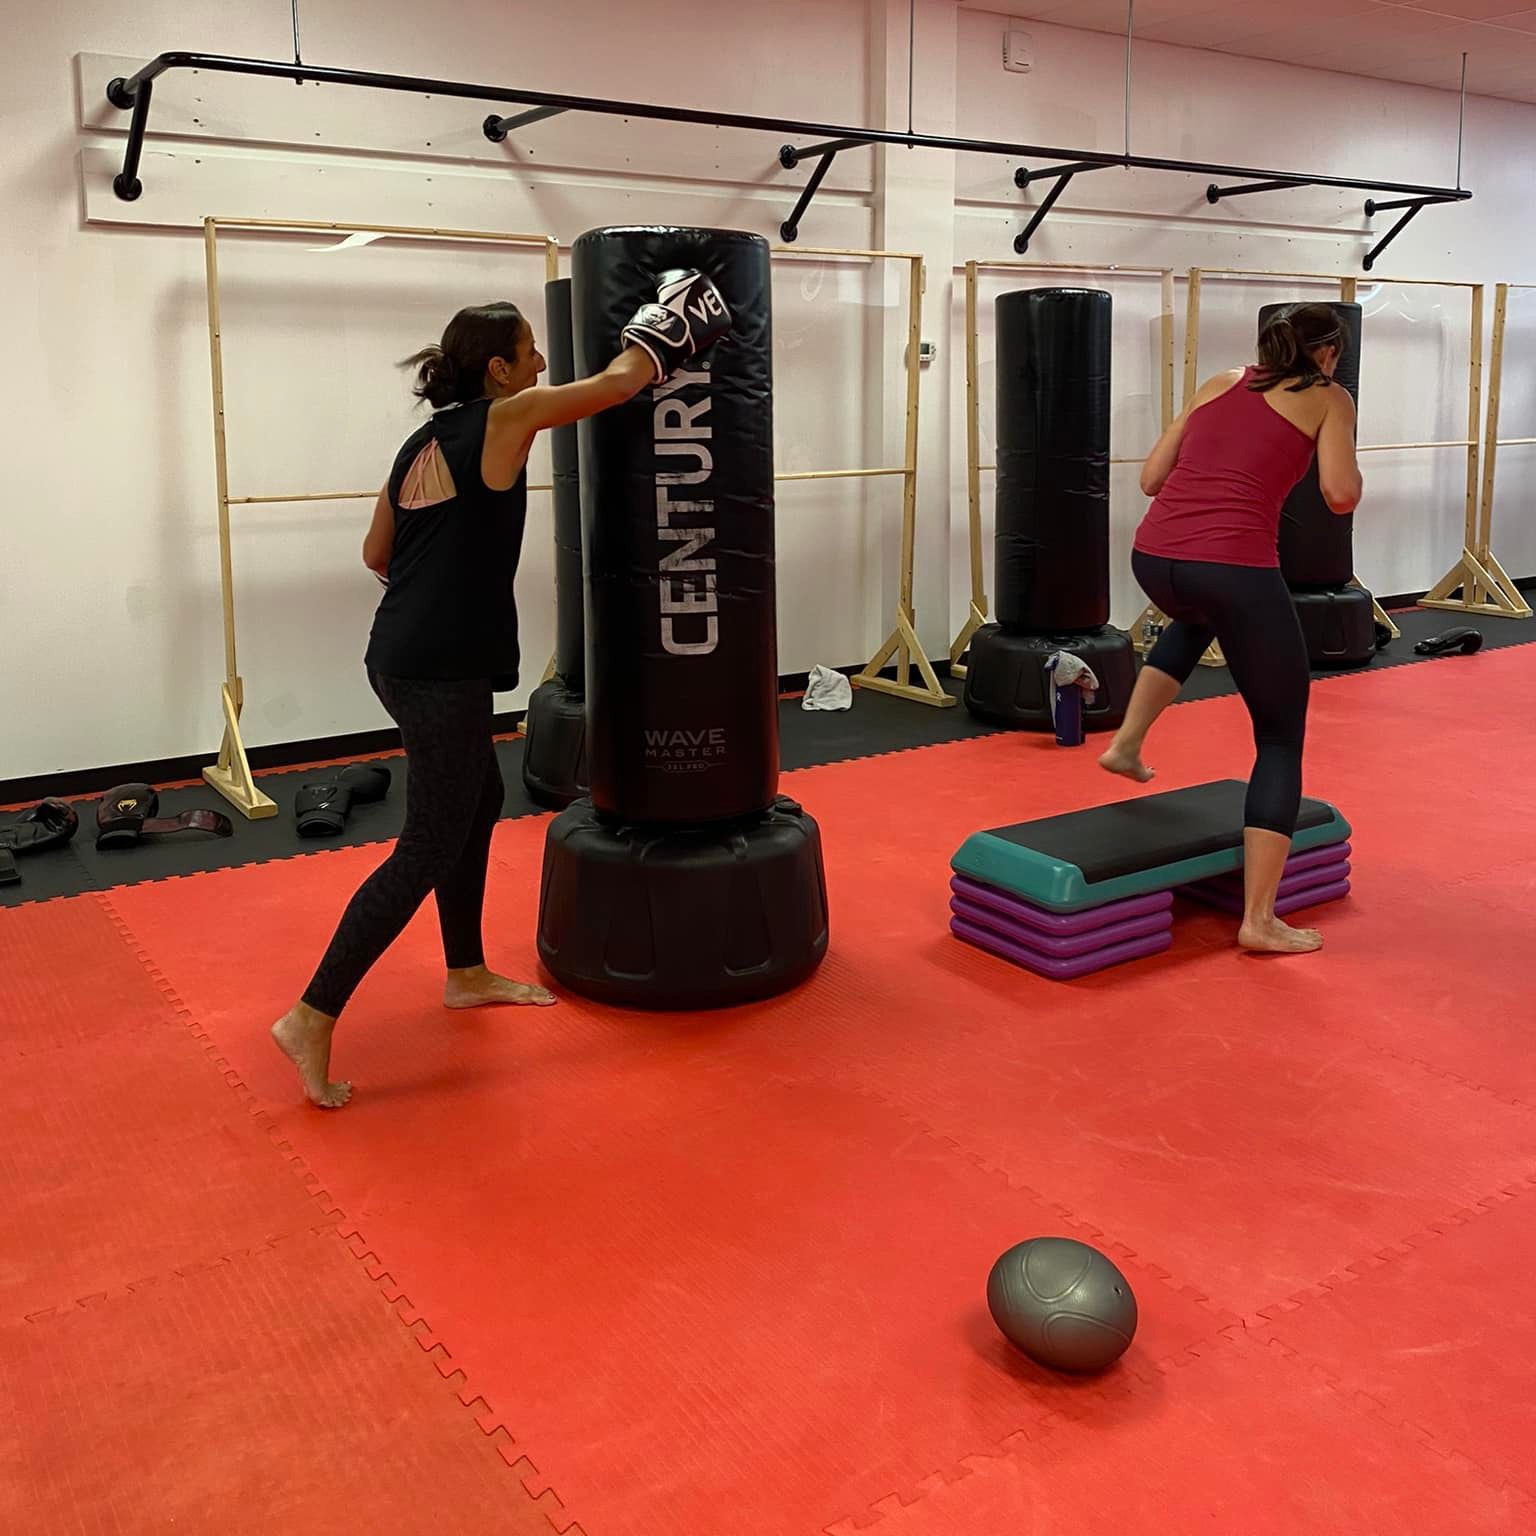 A woman is hitting a century boxing bag in a gym